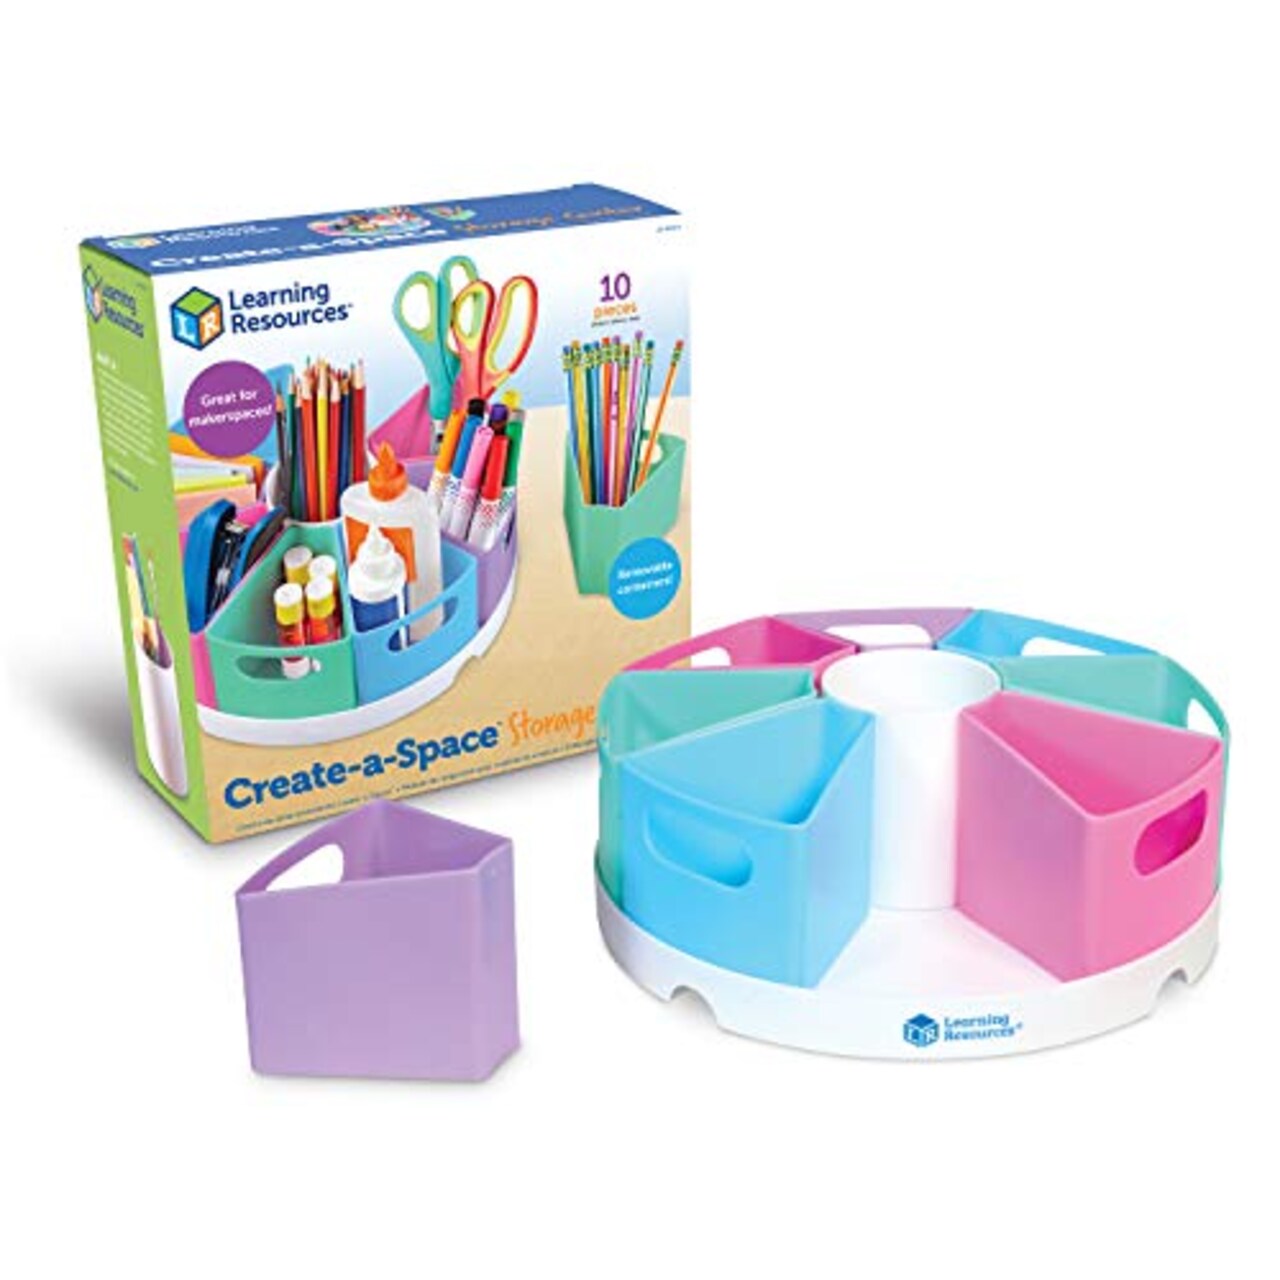 Learning Resources Create-a-Space Storage Center, 10 Piece set